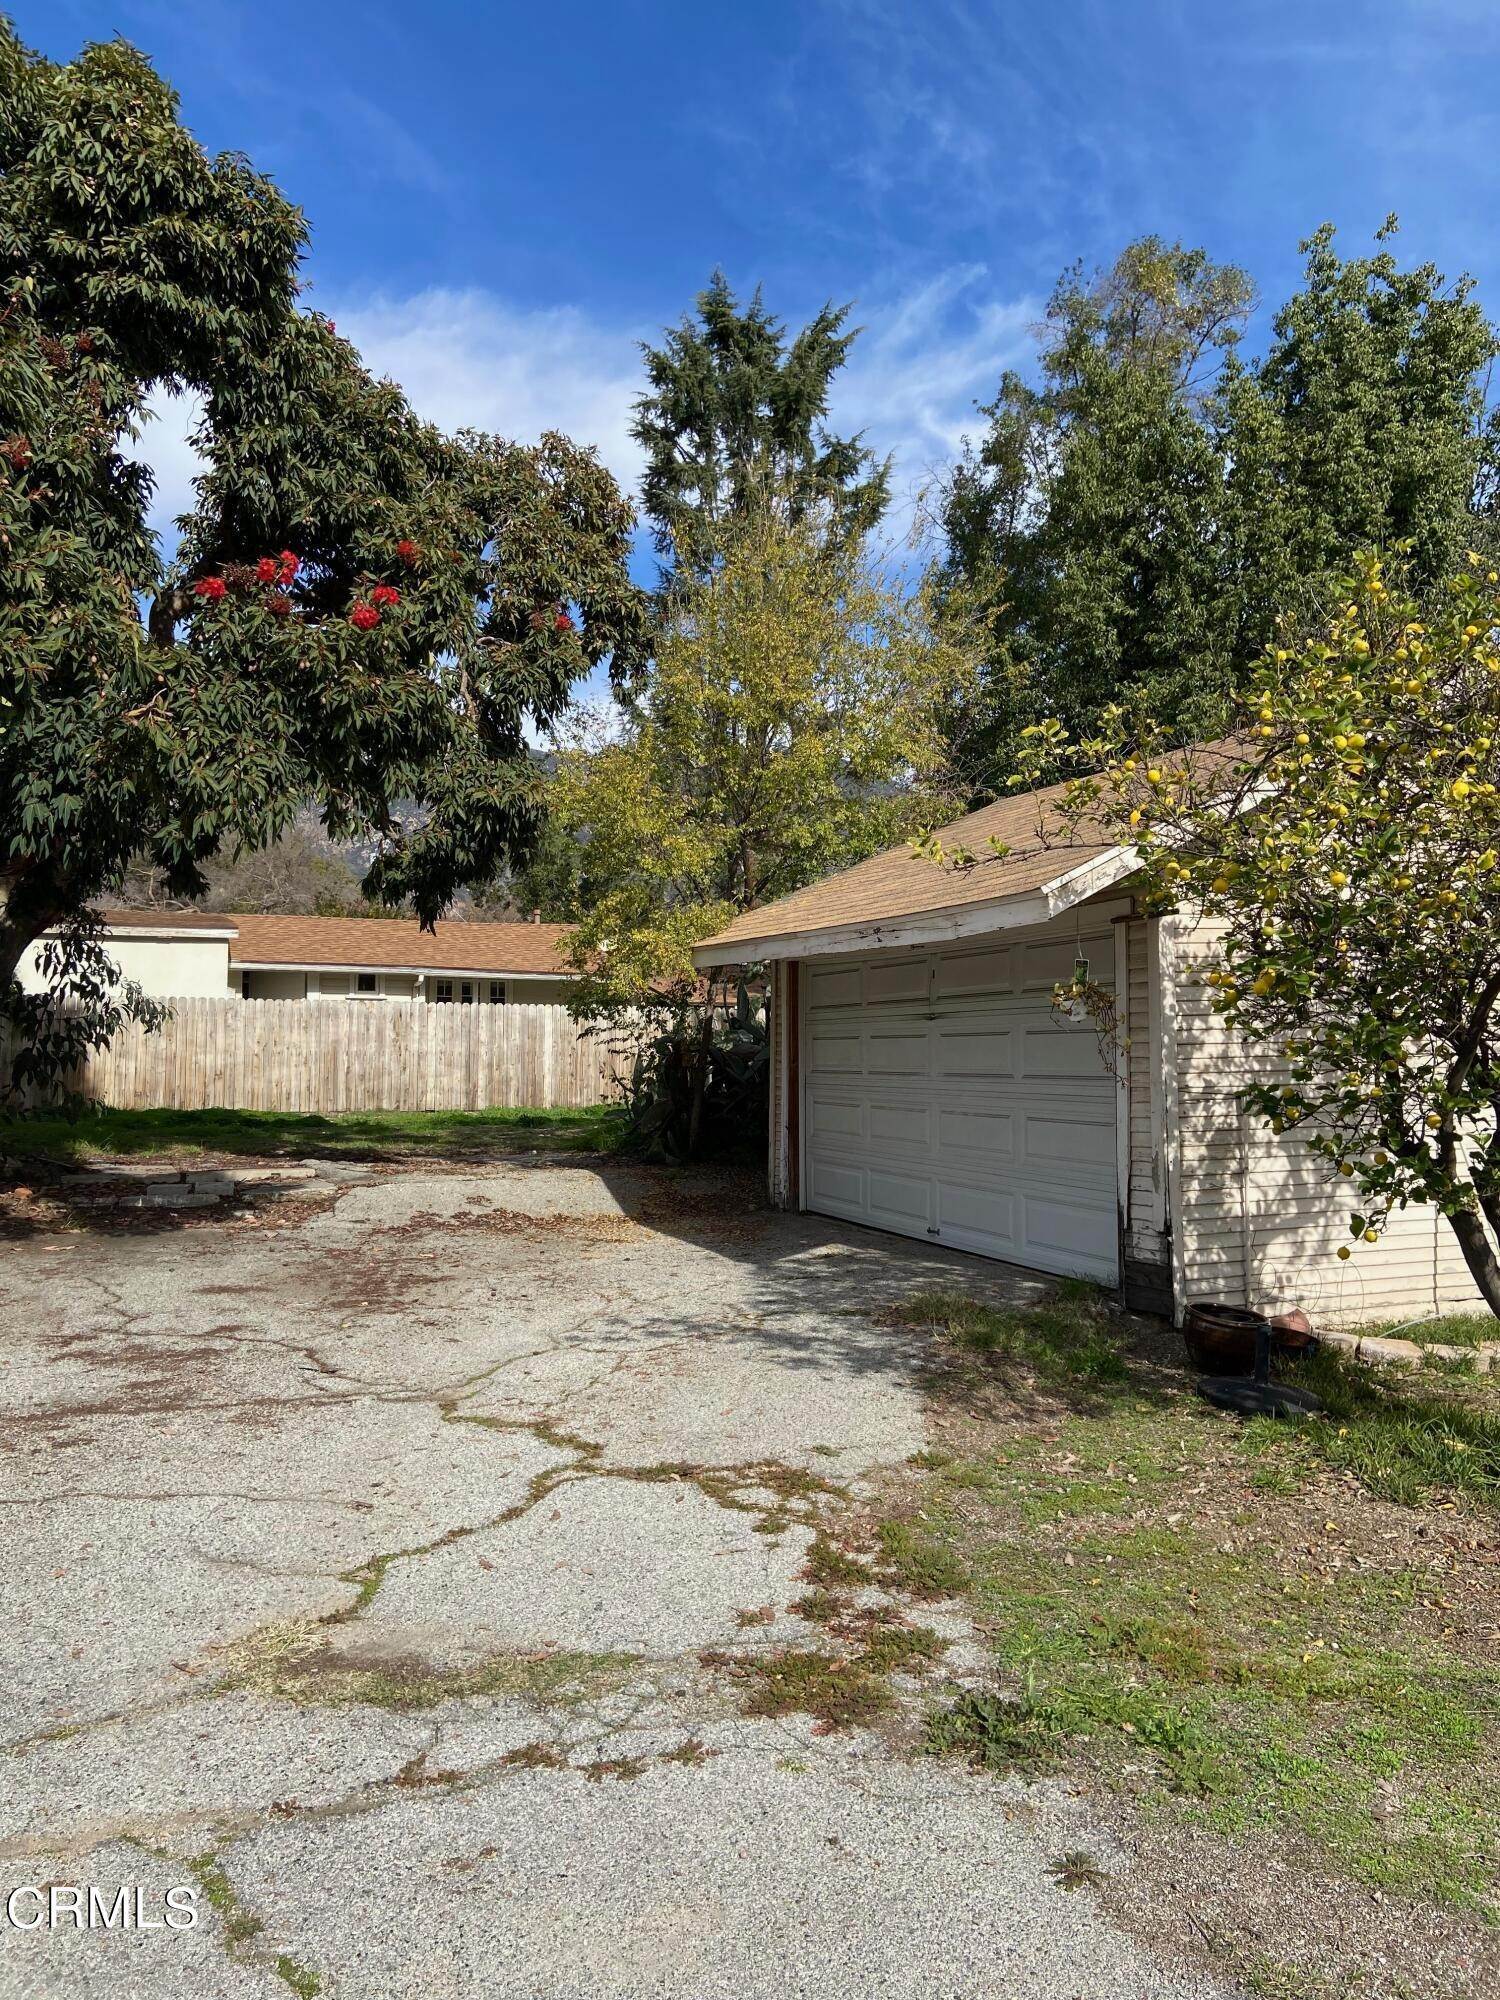 12. Single Family Homes for Sale at 1495 East Elizabeth Street Pasadena, California 91104 United States